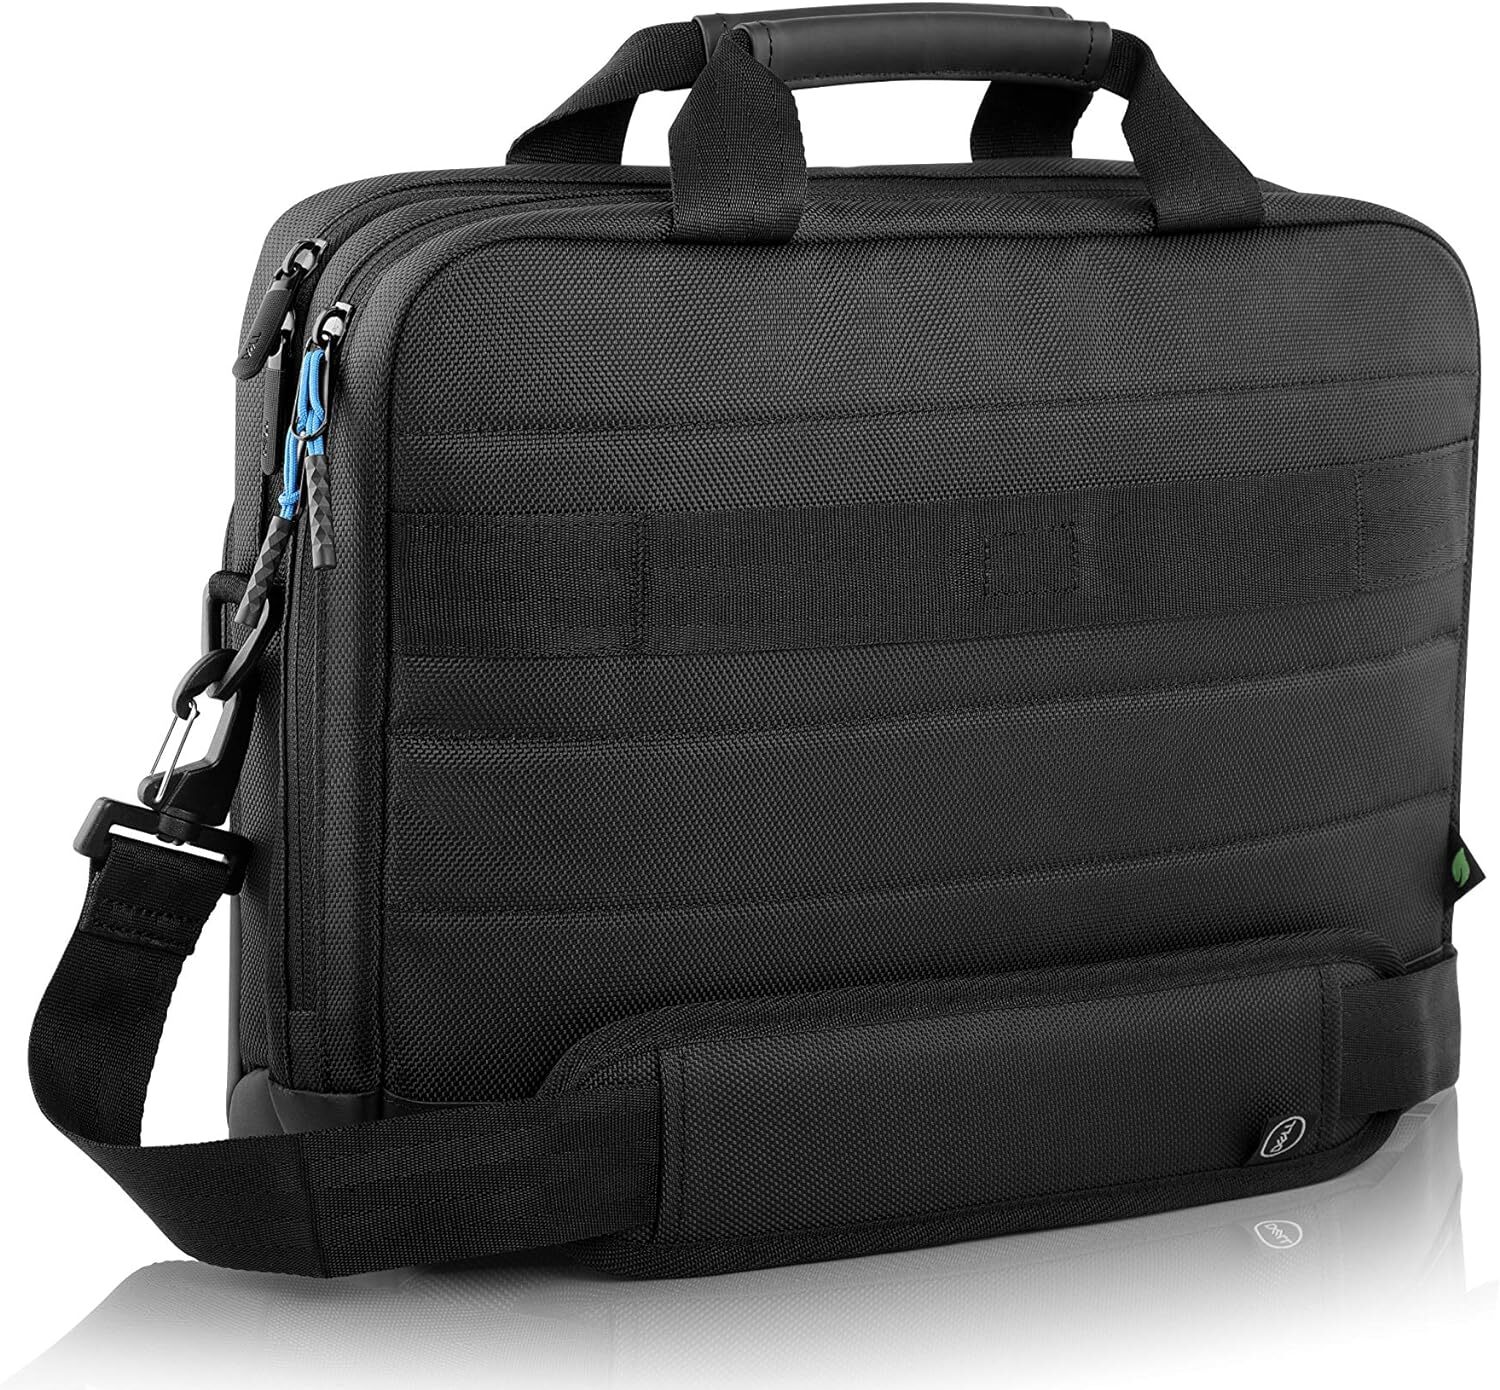 Dell Pro Briefcase 14 Laptop Bag for 14" Laptops PO-BC-14-20 - New, Open Box Image 2